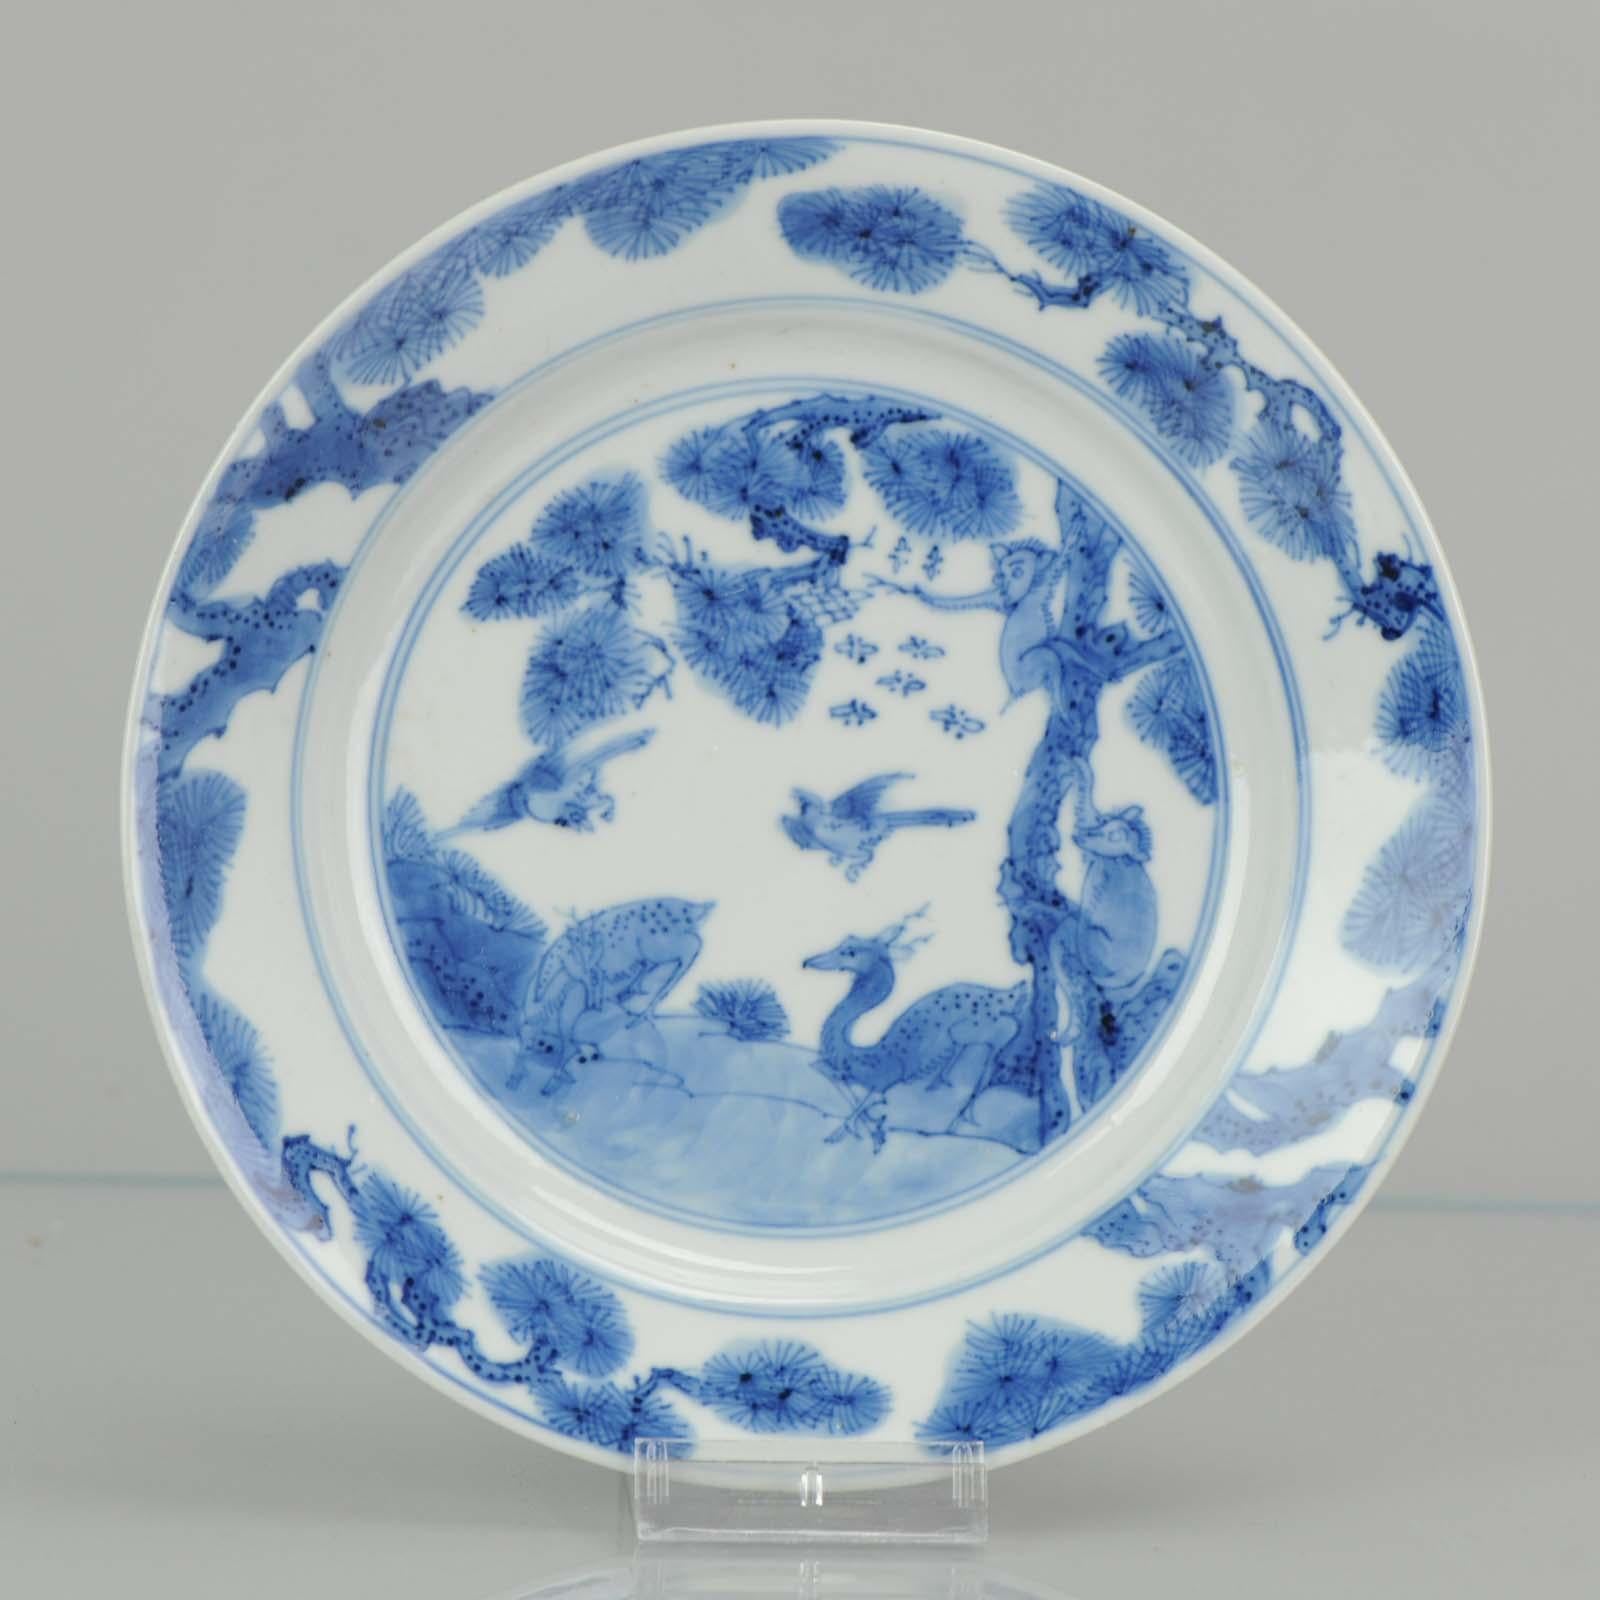 A very nicely plate with a rare scene of monkey, bees, magpie, and dee. Unusual Xuande mark at the base.

Visual puns, often made by using homophones, are a popular design language in Chinese art. In addition to being a zodiac animal, the monkey